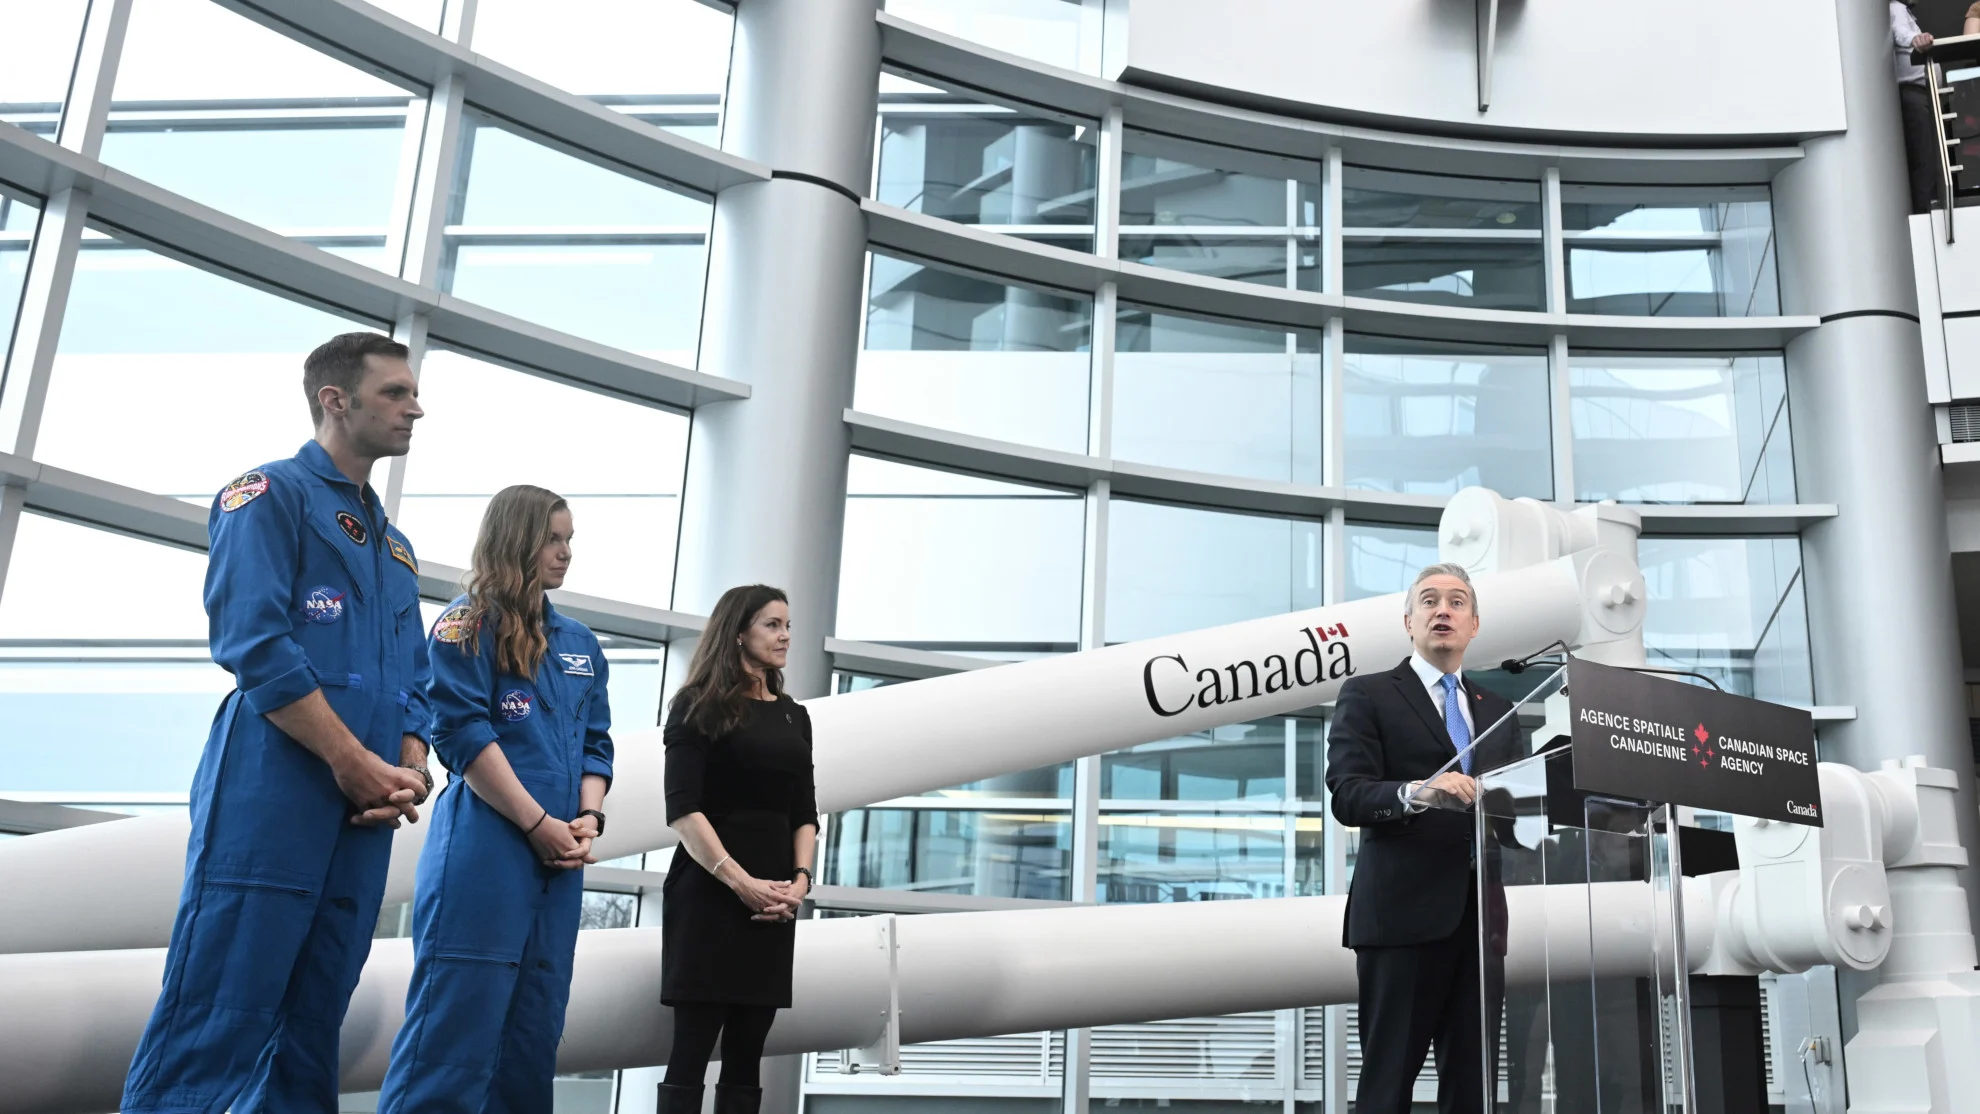 Canada's newest astronauts get their first missions to space